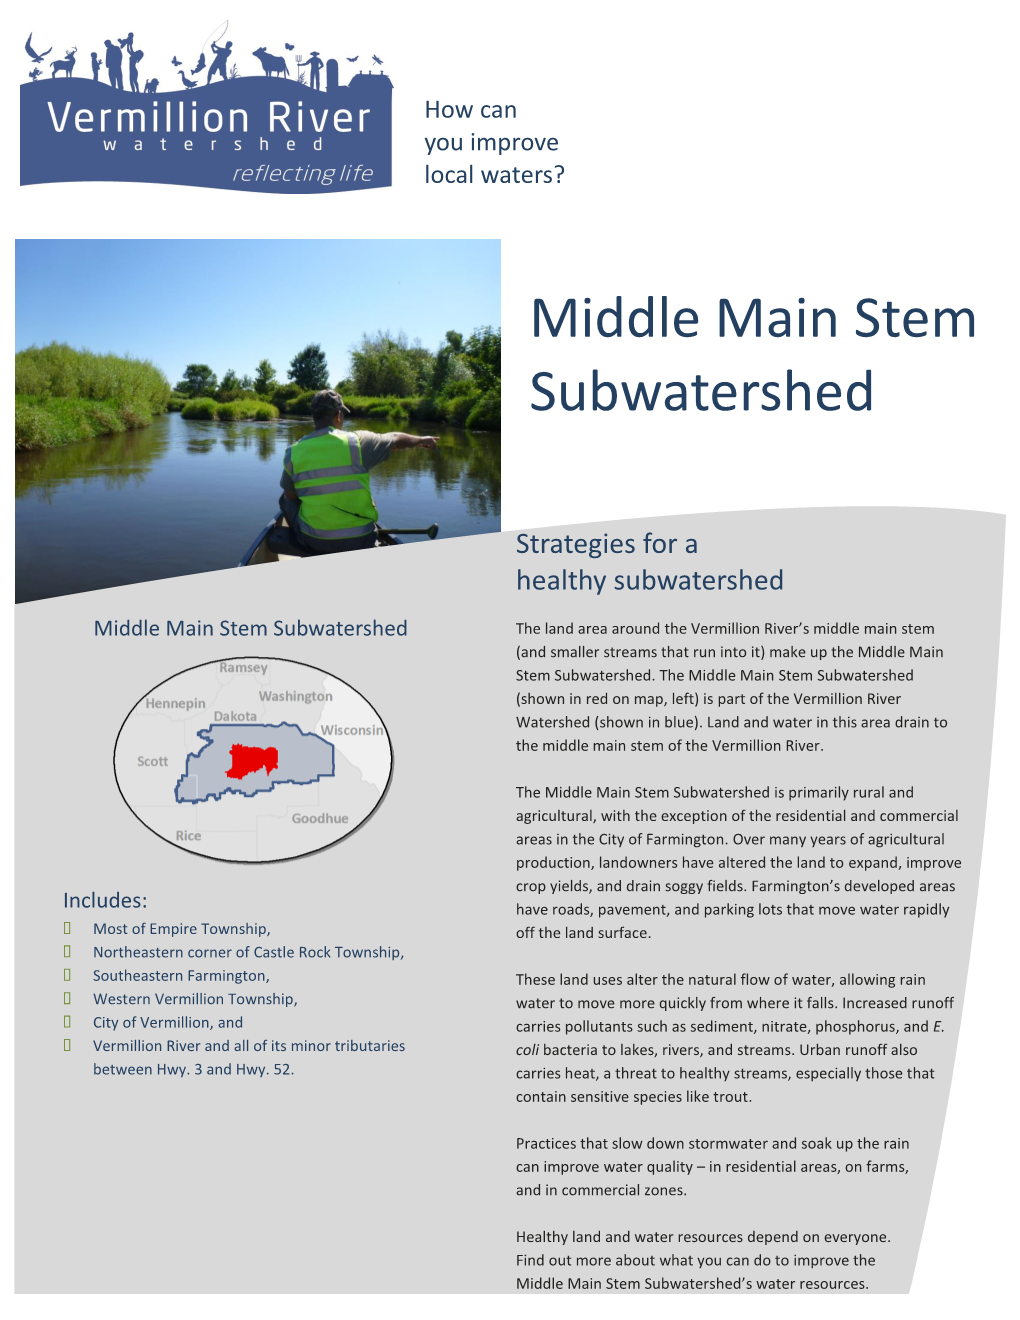 Middle Main Stem Subwatershed